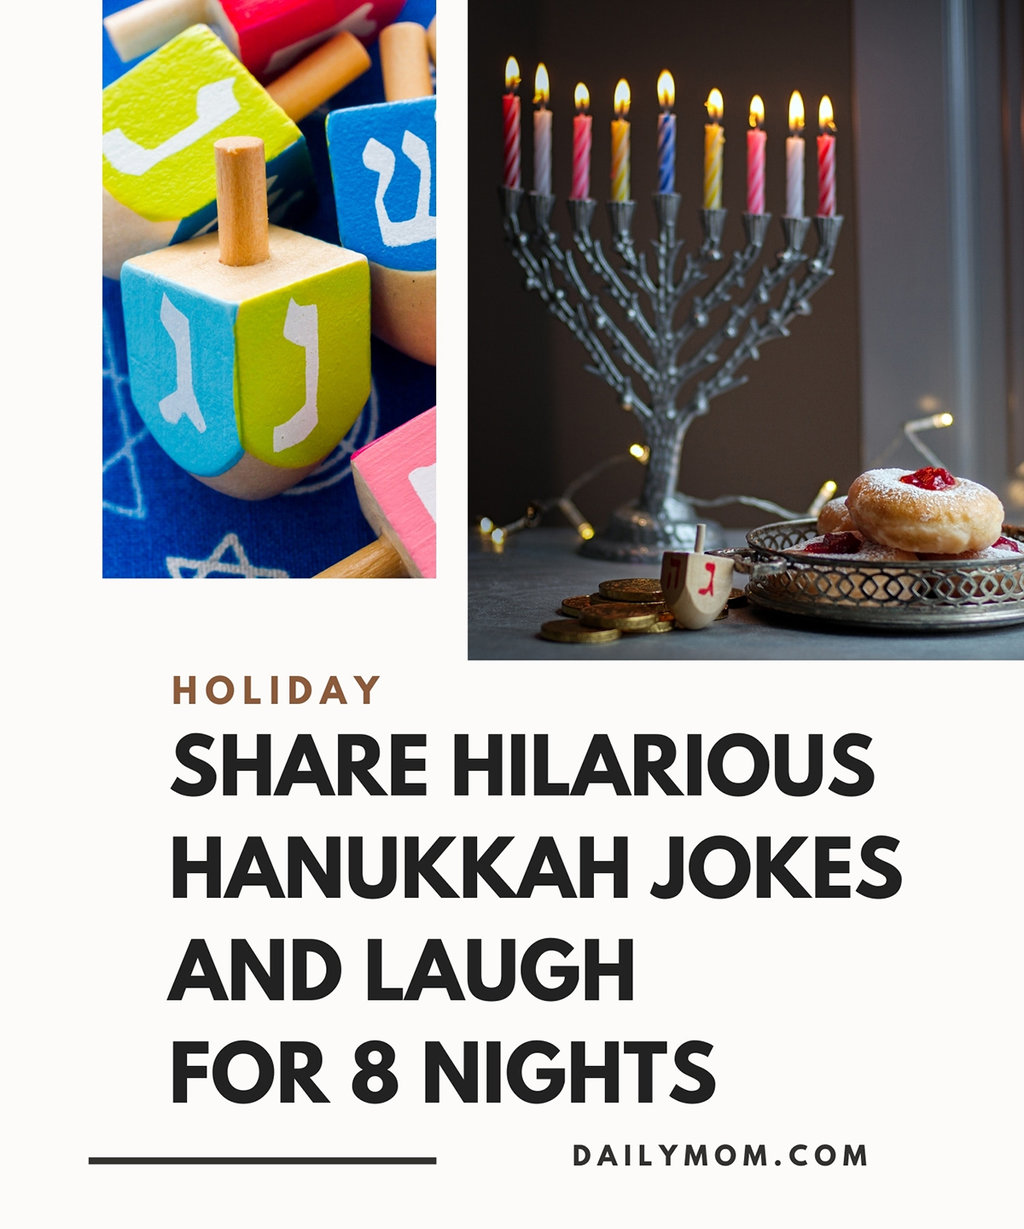 Hilarious Hanukkah Jokes To Fill 8 Nights With Laughter And Giggles Read Now